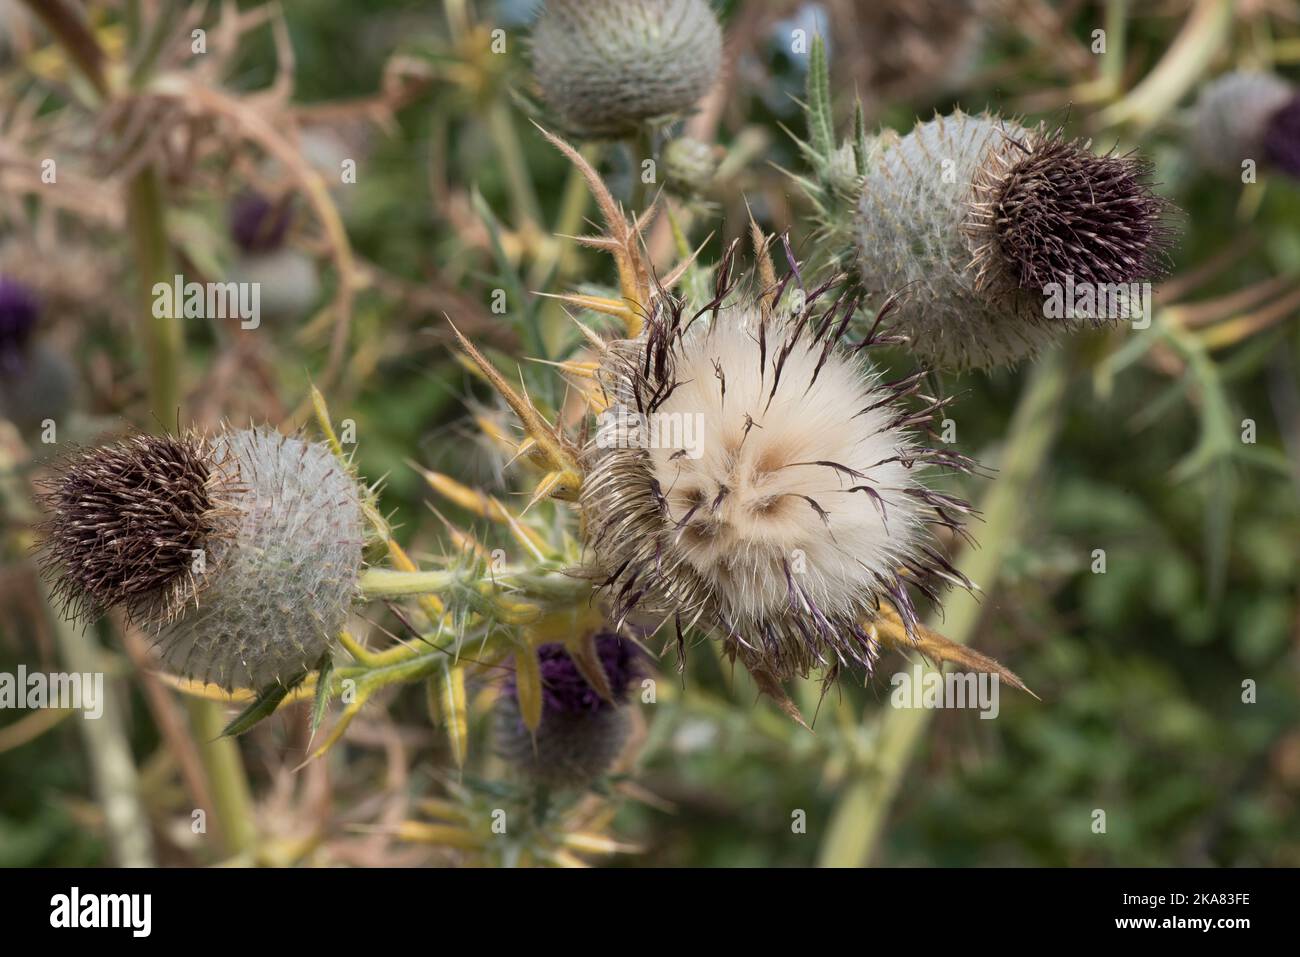 Seed heads of a woolly thistle (Cirsium eriophorum) dying flowers and opening seed head with pappus before distribution, Berkshire, August Stock Photo